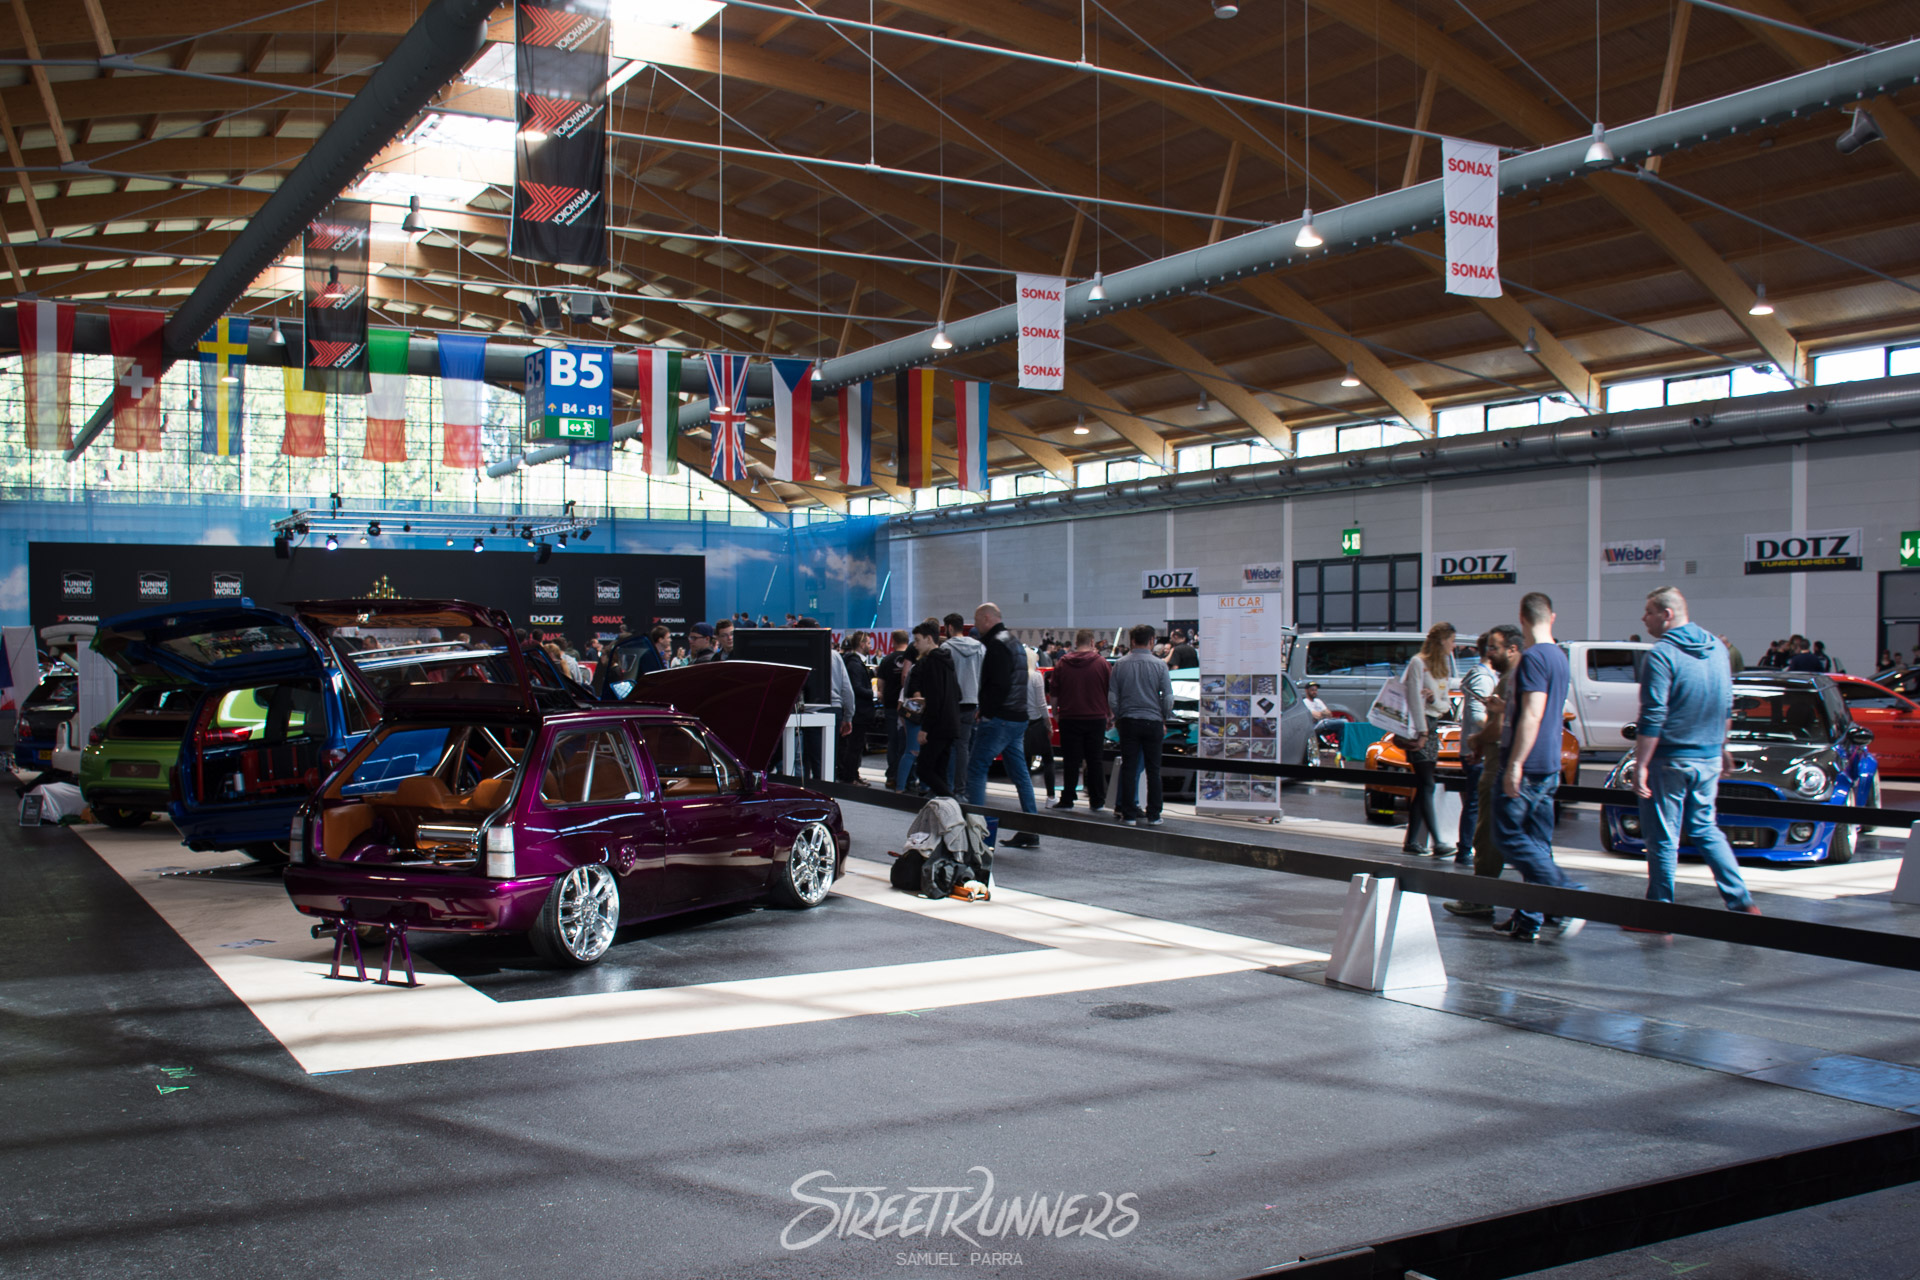 Tuning World Bodensee, for everyone